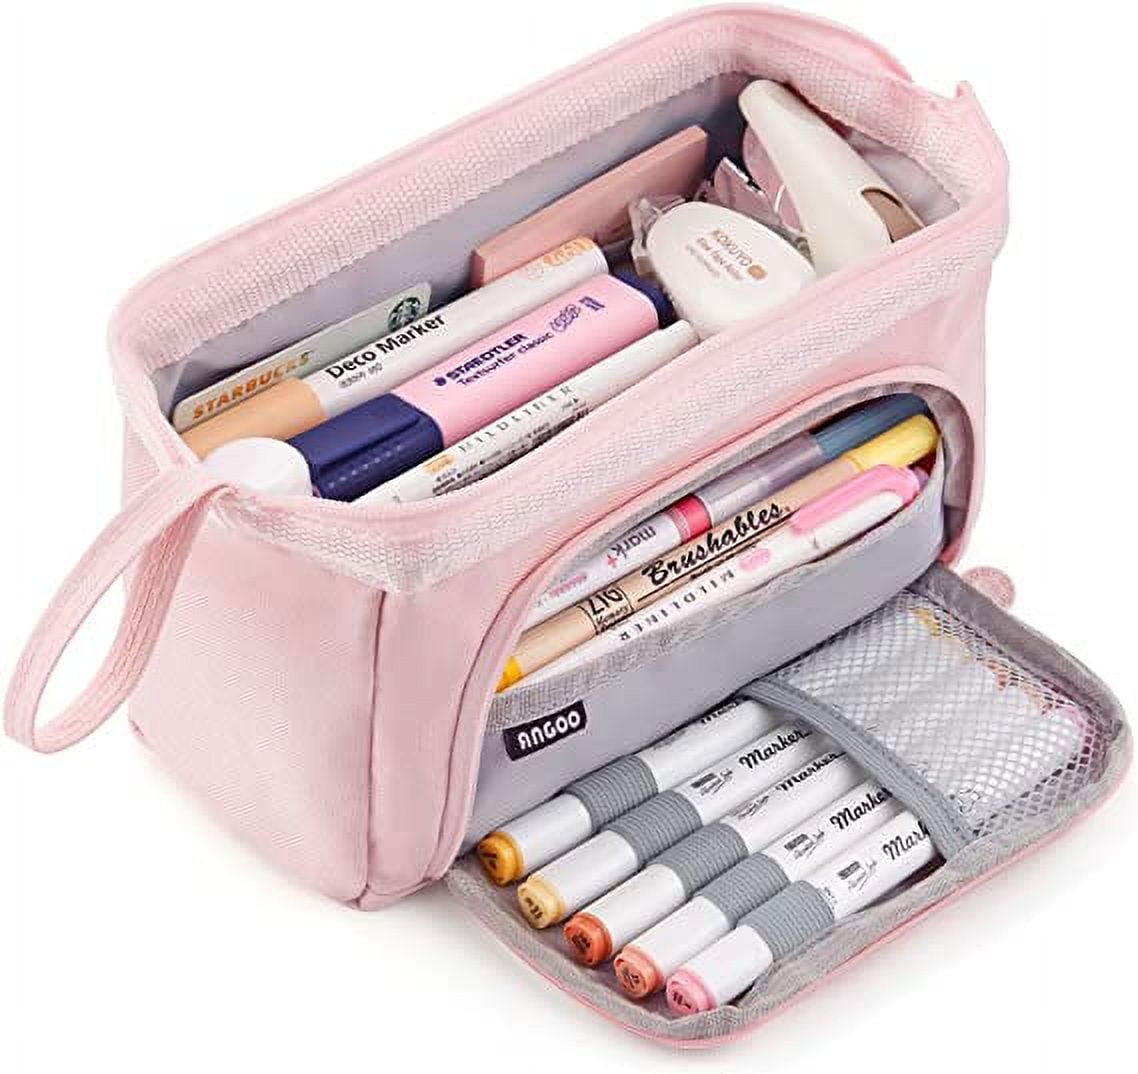  Large Pencil Case with 4 Compartments, Big Capacity Pencil Bag  Canvas Pencil Pouch with Zipper, Pencil Pouch Aesthetic, Pencil Pen Case  Bag for Office College School Teen Boys Girls Students (Pink) 